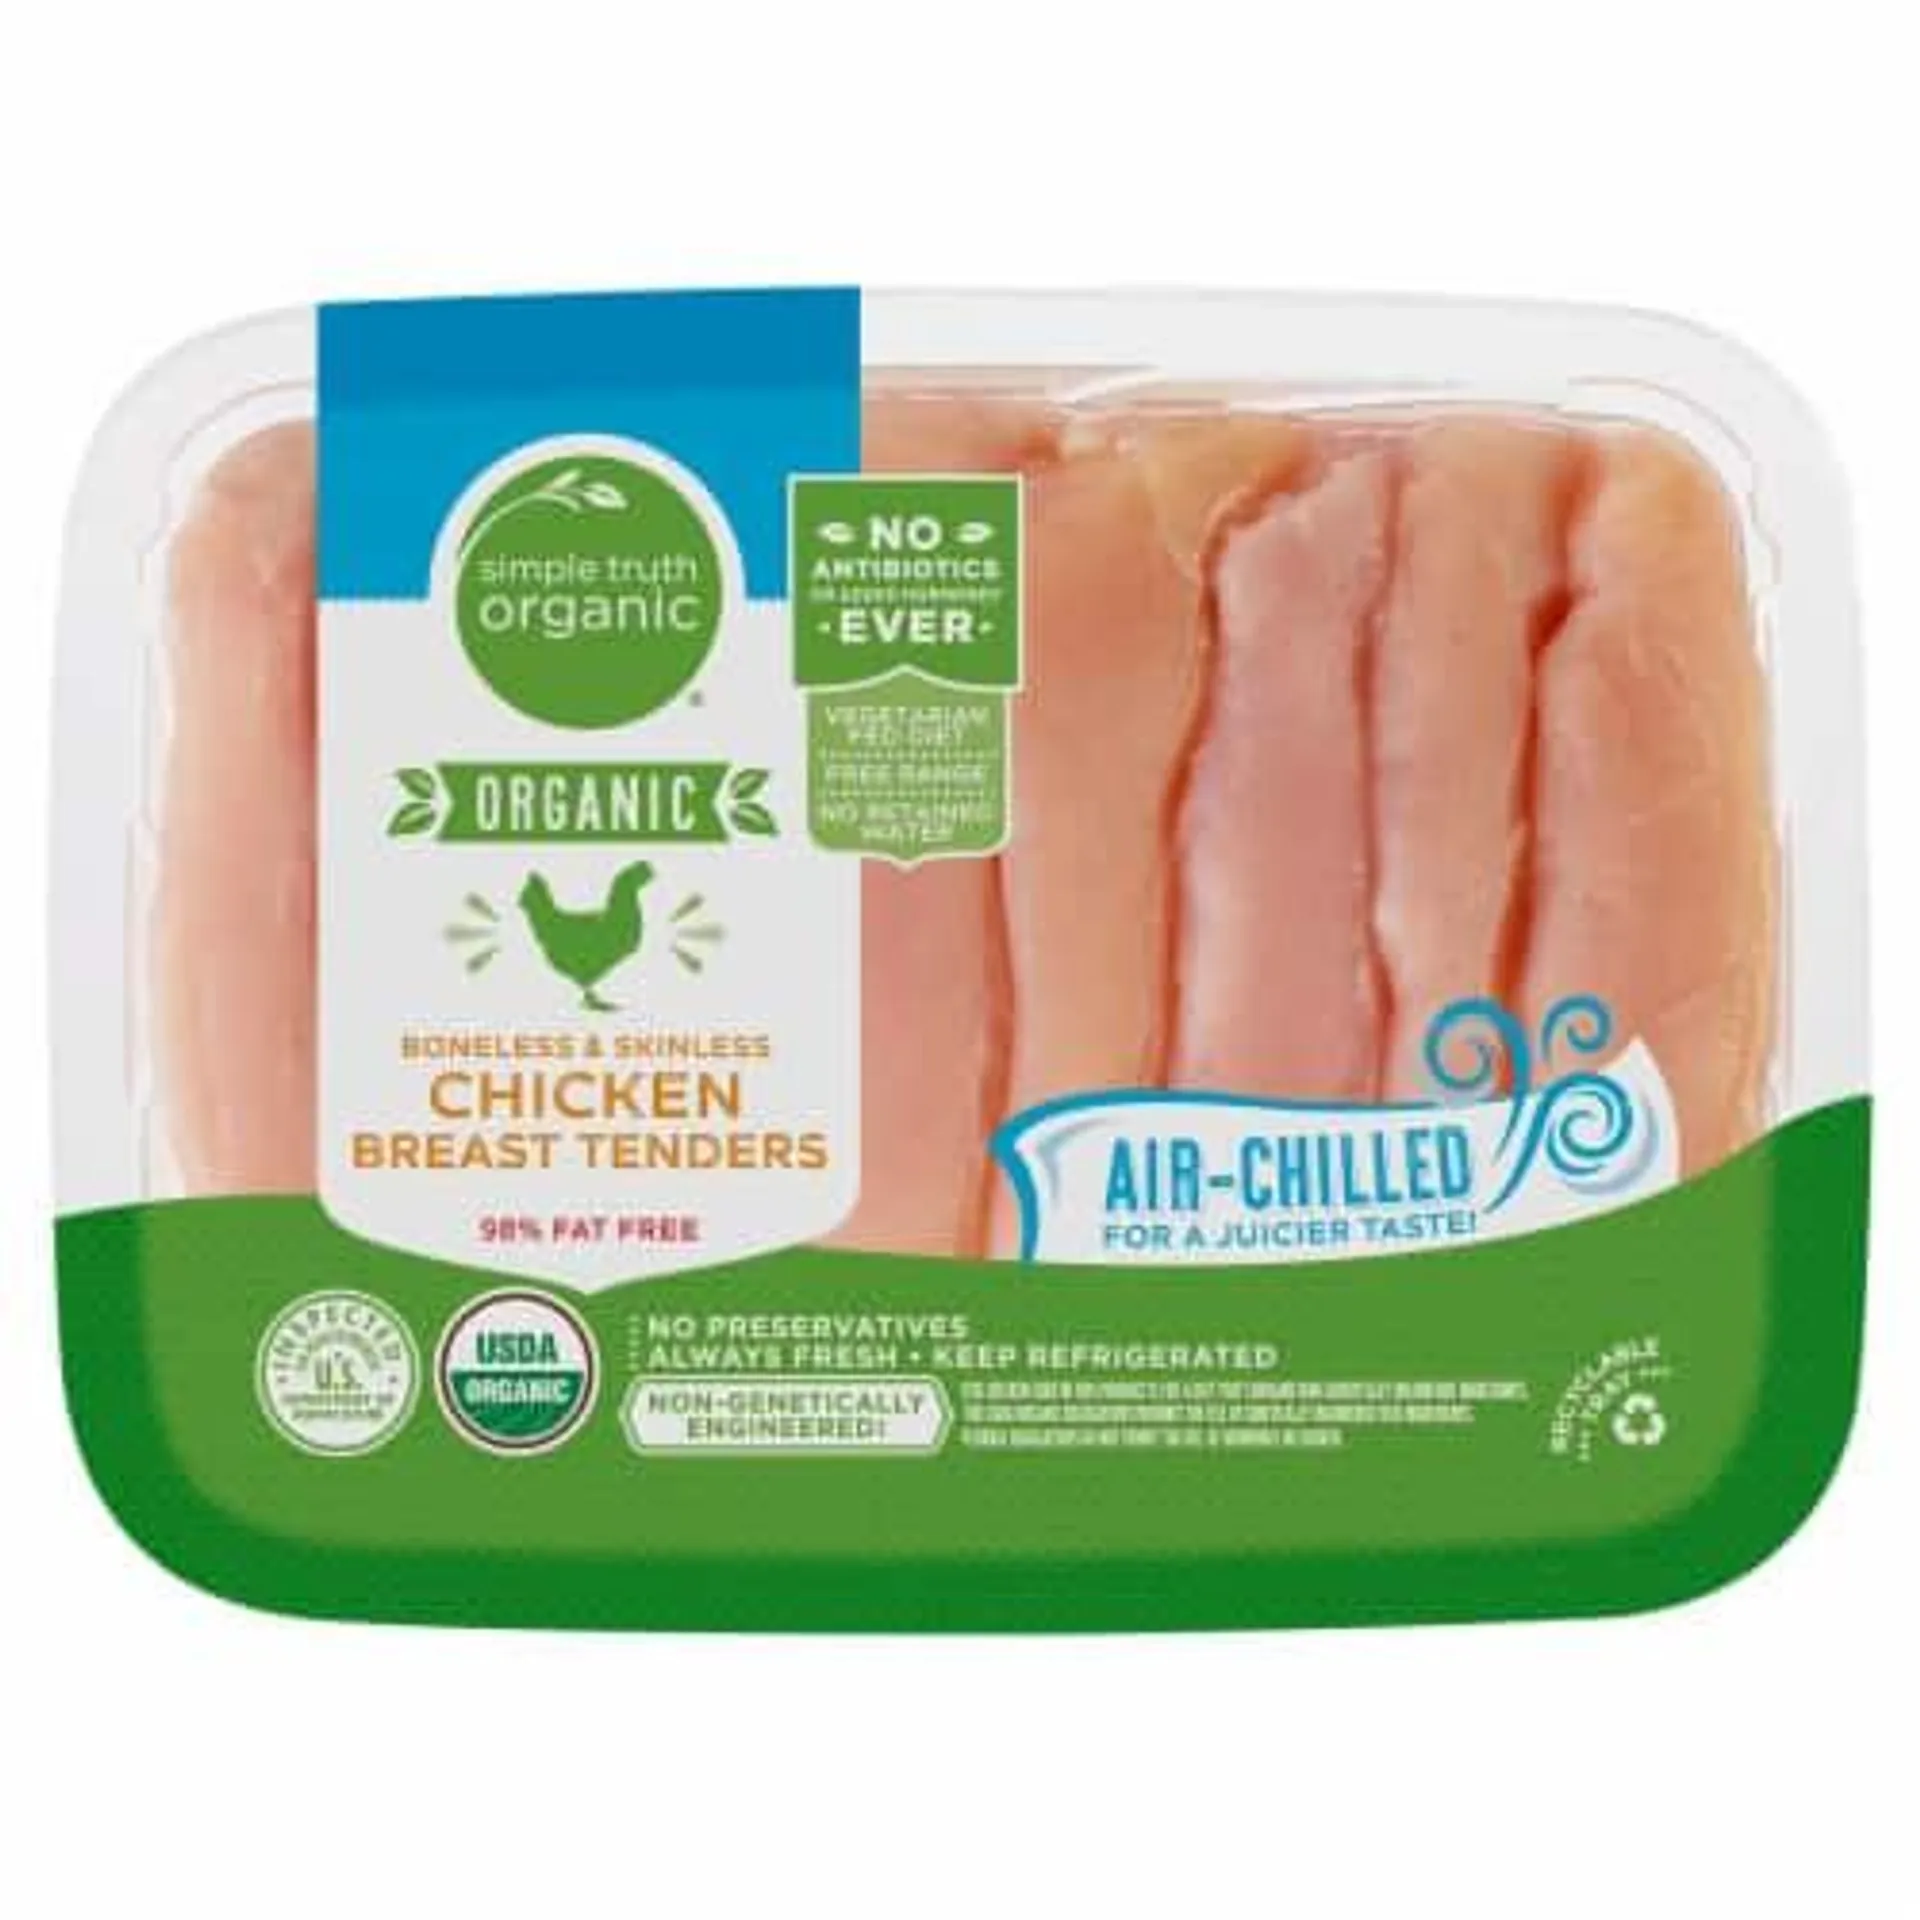 Simple Truth Organic® Ready to Cook Organic Chicken Tenders Air Chilled